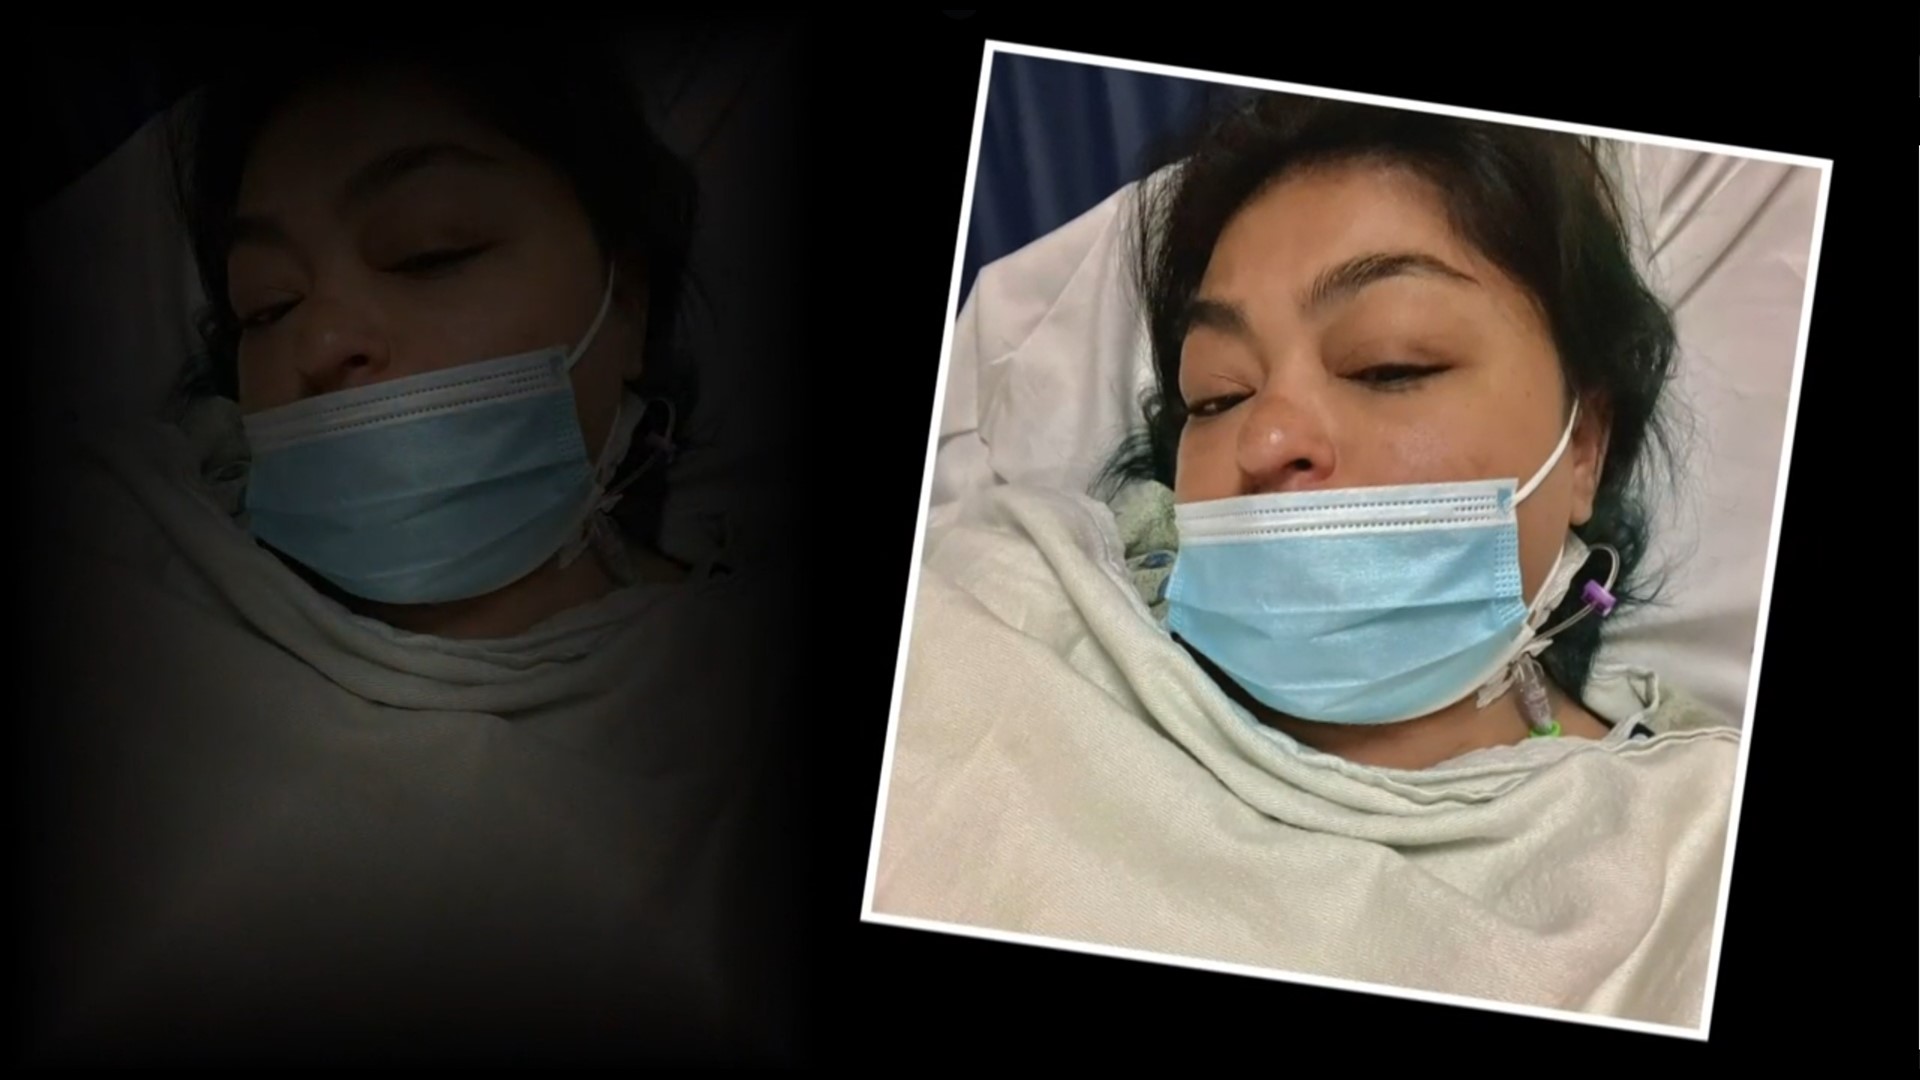 Cristina's family is fundraising to help with medical bills while she waits for a new kidney.